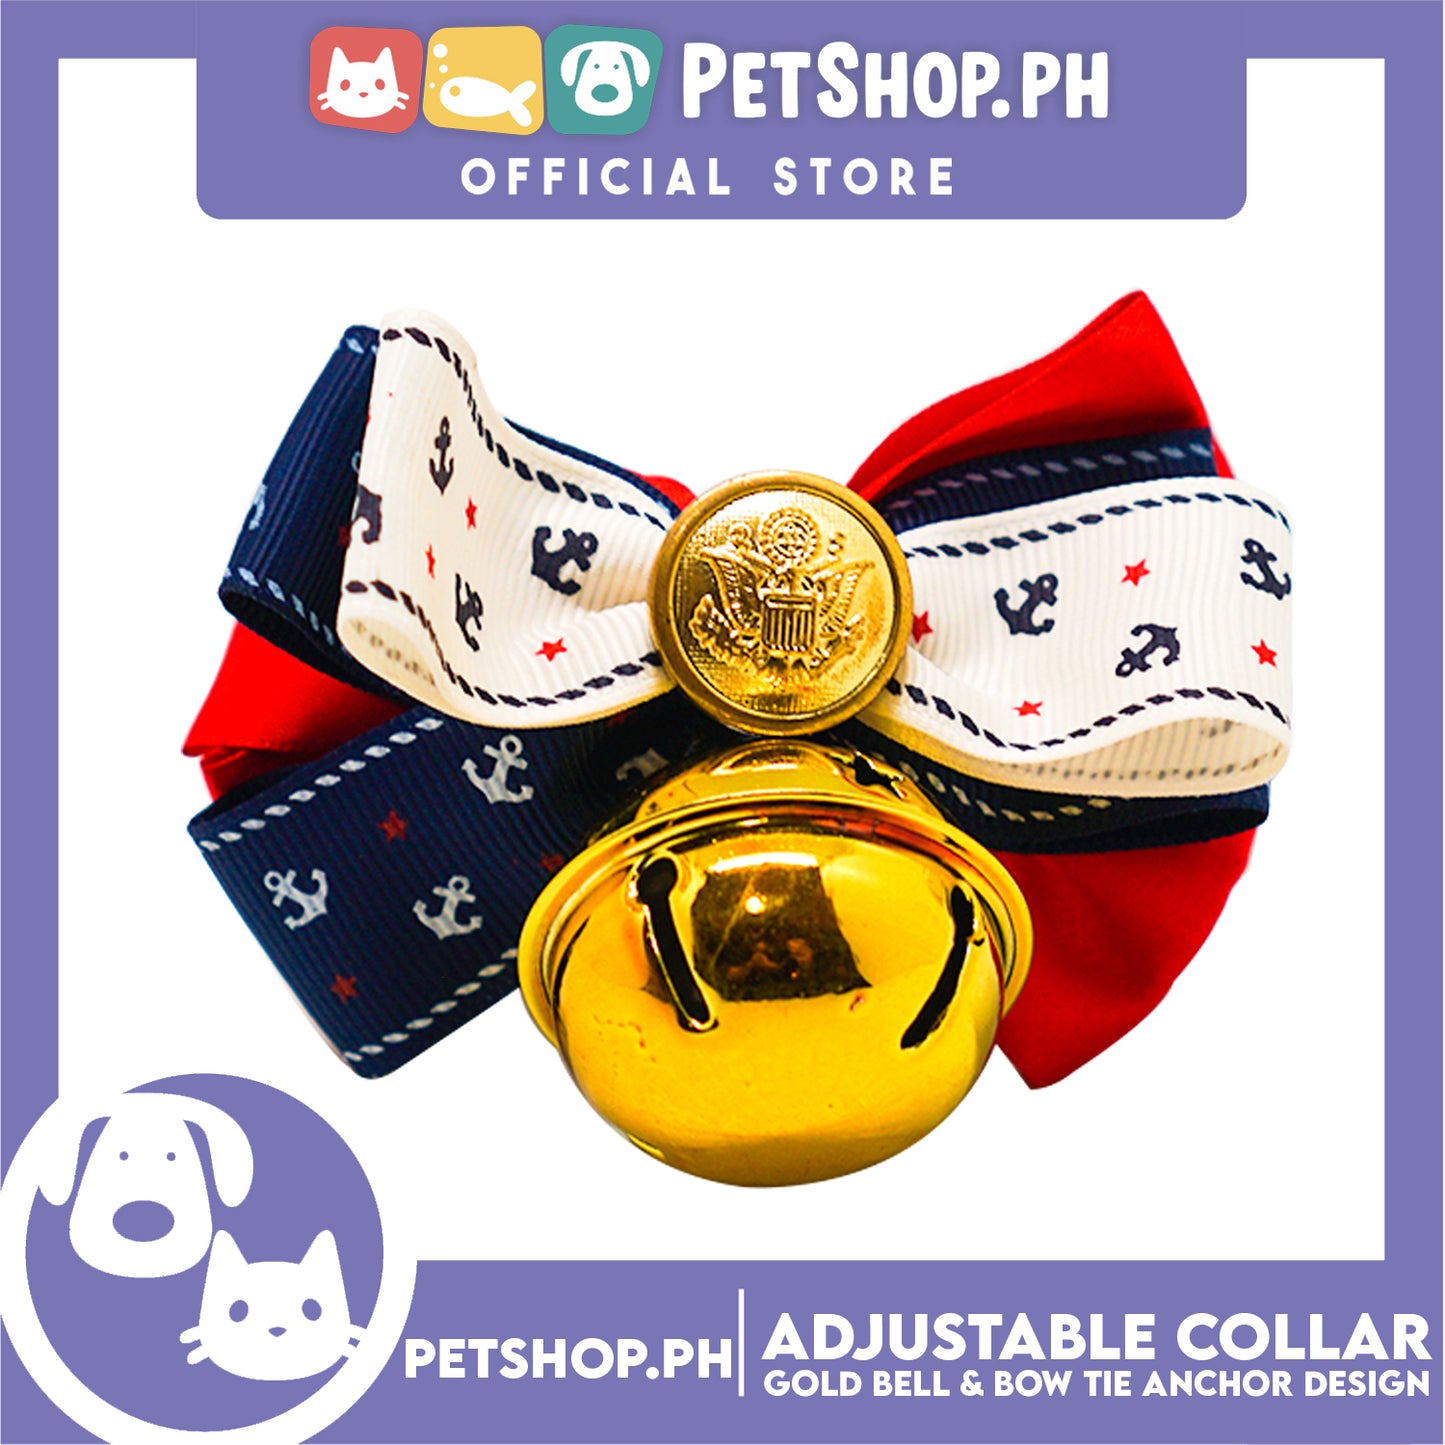 Pet Collar Adjustable with Gold Bell and Bow Tie Anchor Design, Leather Cat Collar, Necklace Bow Tie for Kitten and Puppies